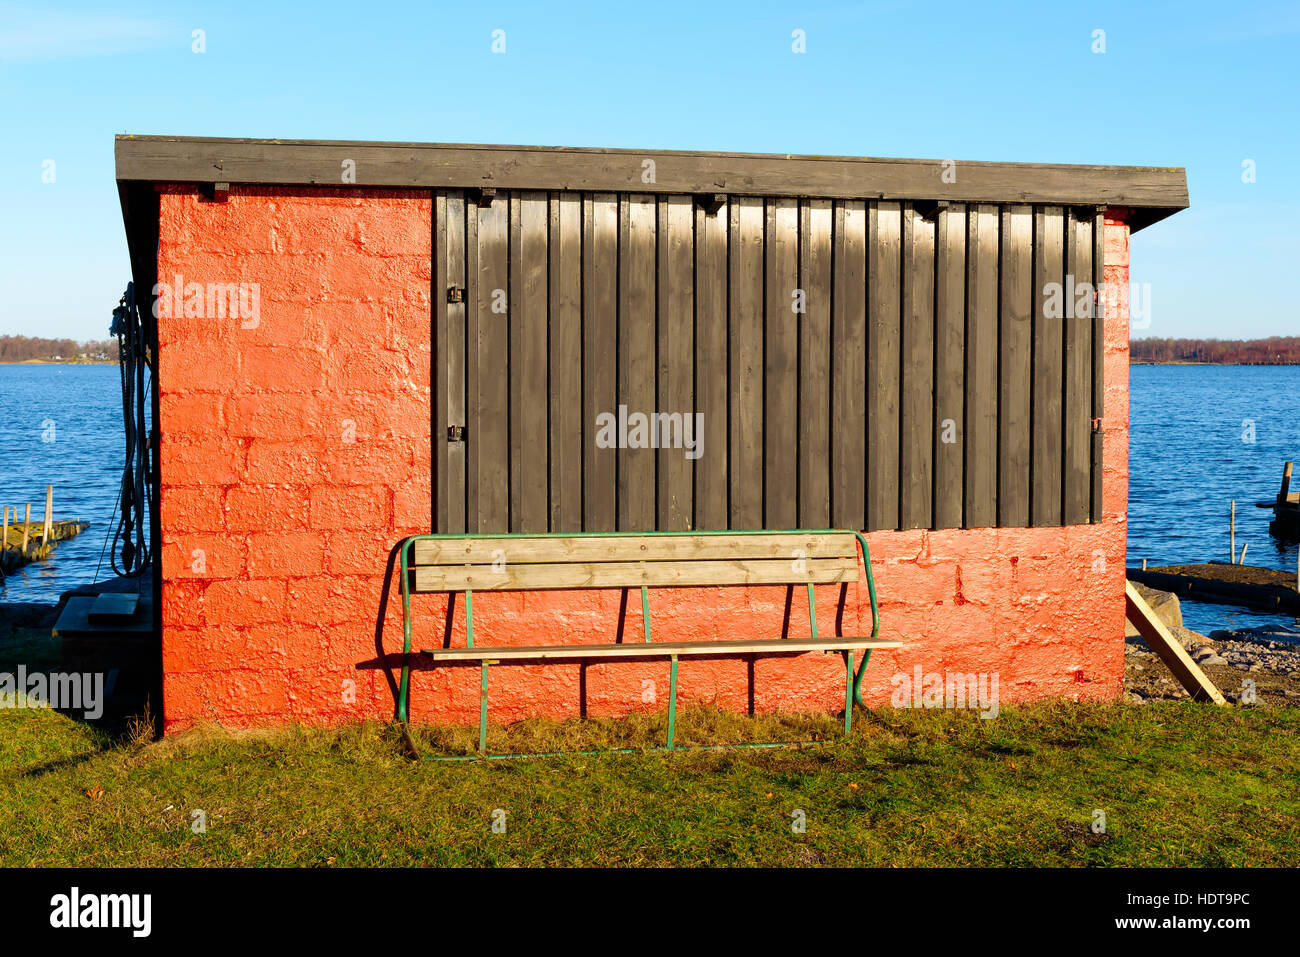 Empty green bench outside a small red storage shed with large wooden hatch. Surrounding coastline visible at sides. Copy space above bench. Stock Photo